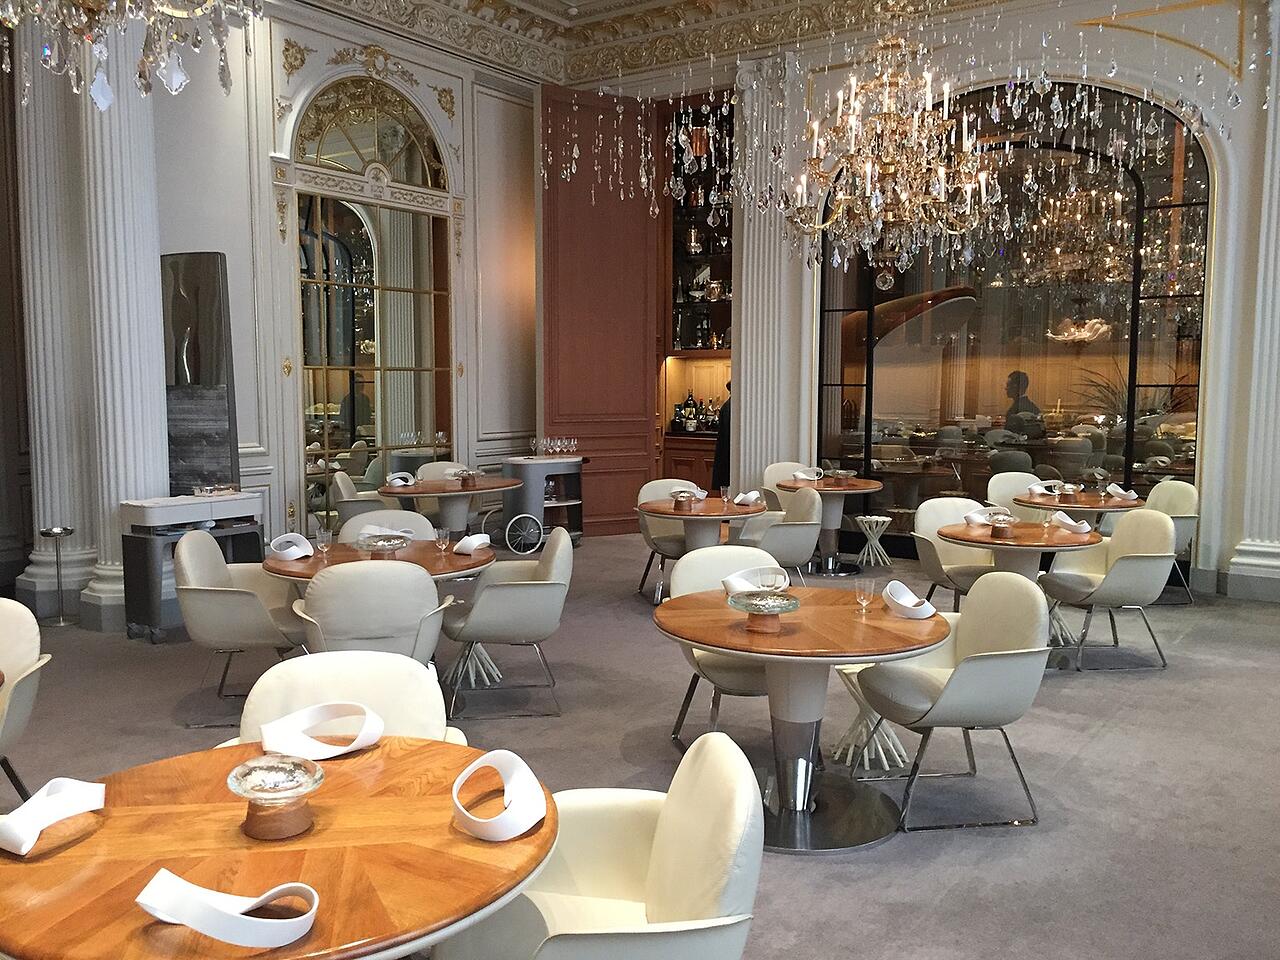 The Value of Teamwork in Service: Insights from the Plaza Athénée in Paris